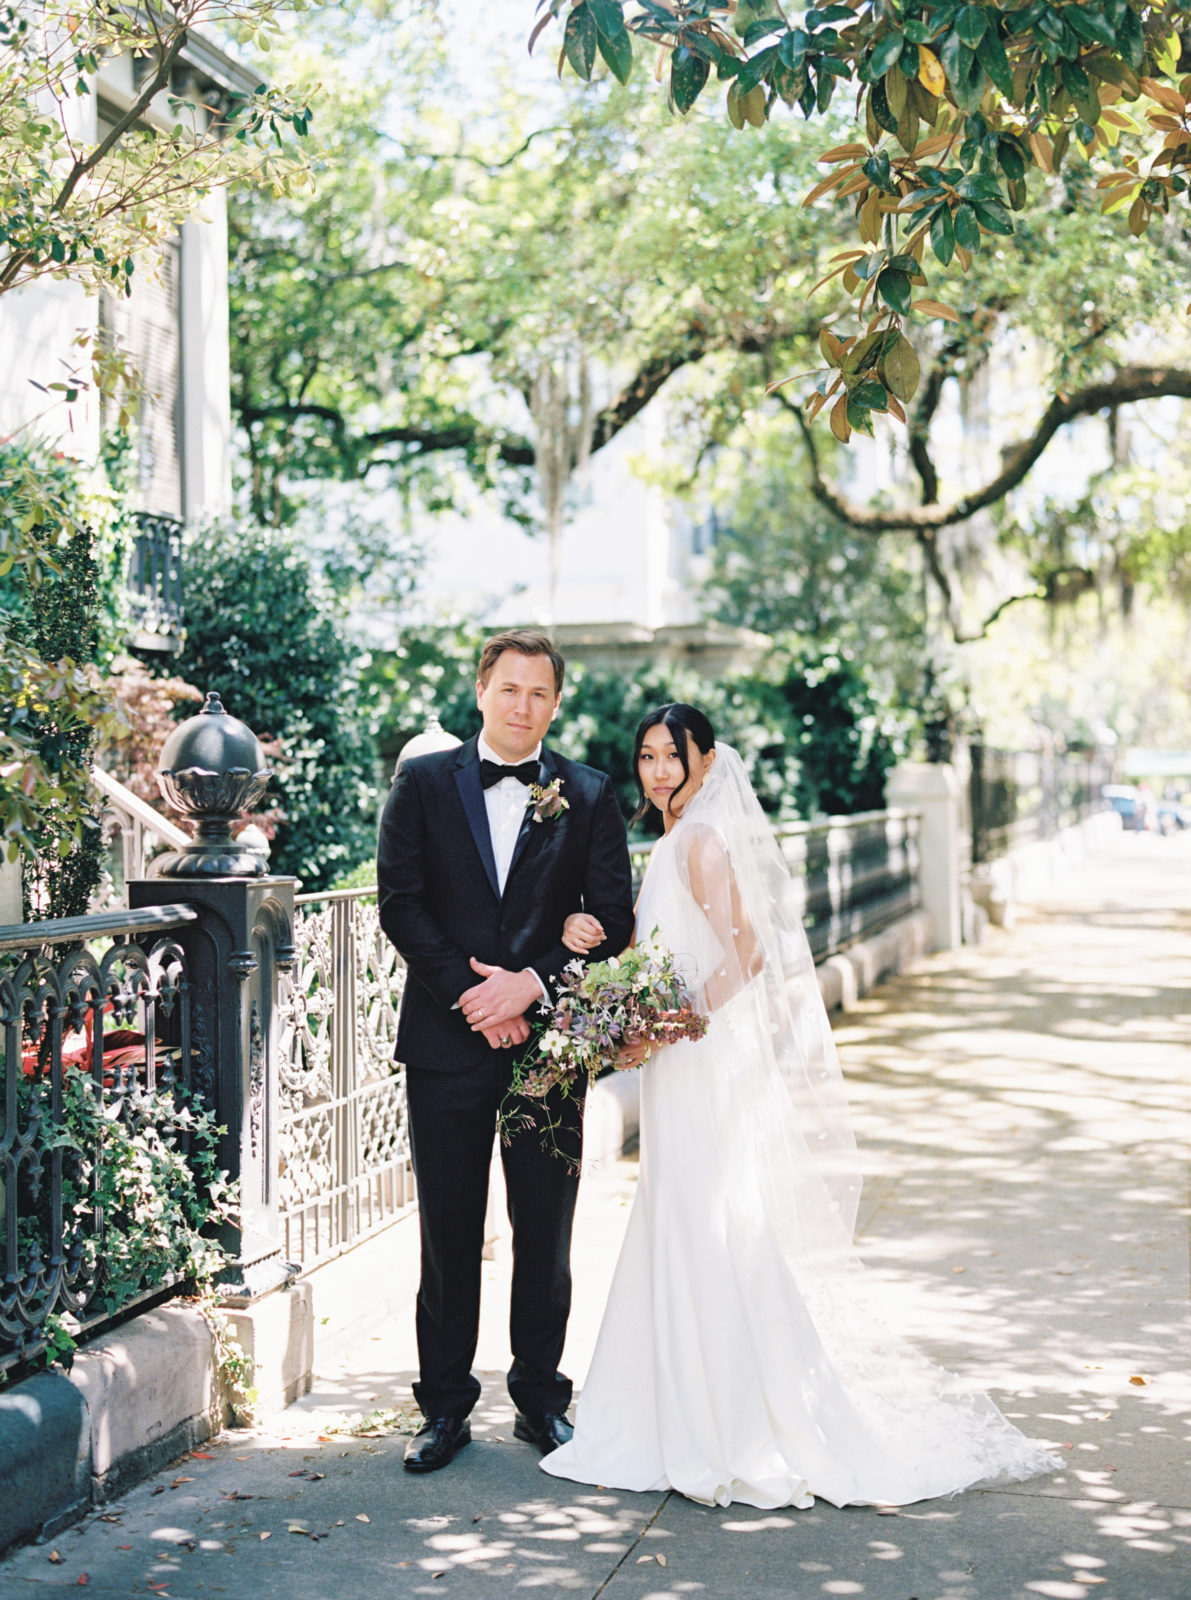 Bride and groom pose for a traditional portrait in the sun-soaked streets of Savannah, Georgia.